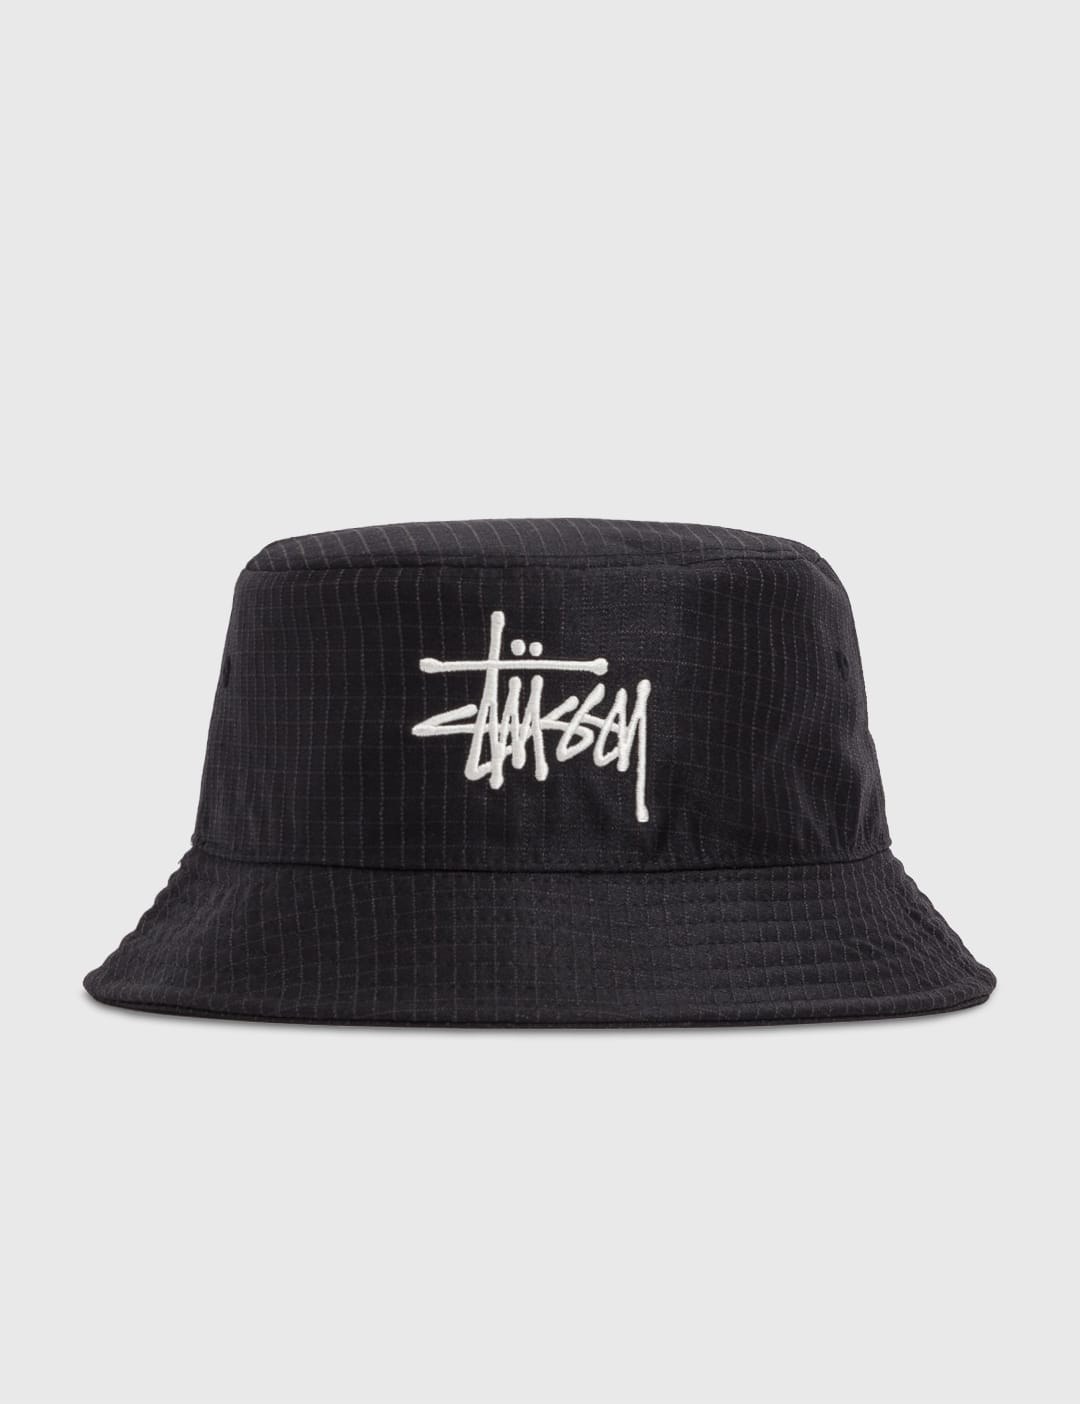 Stüssy - Crown Stock Trucker Cap | HBX - Globally Curated Fashion 